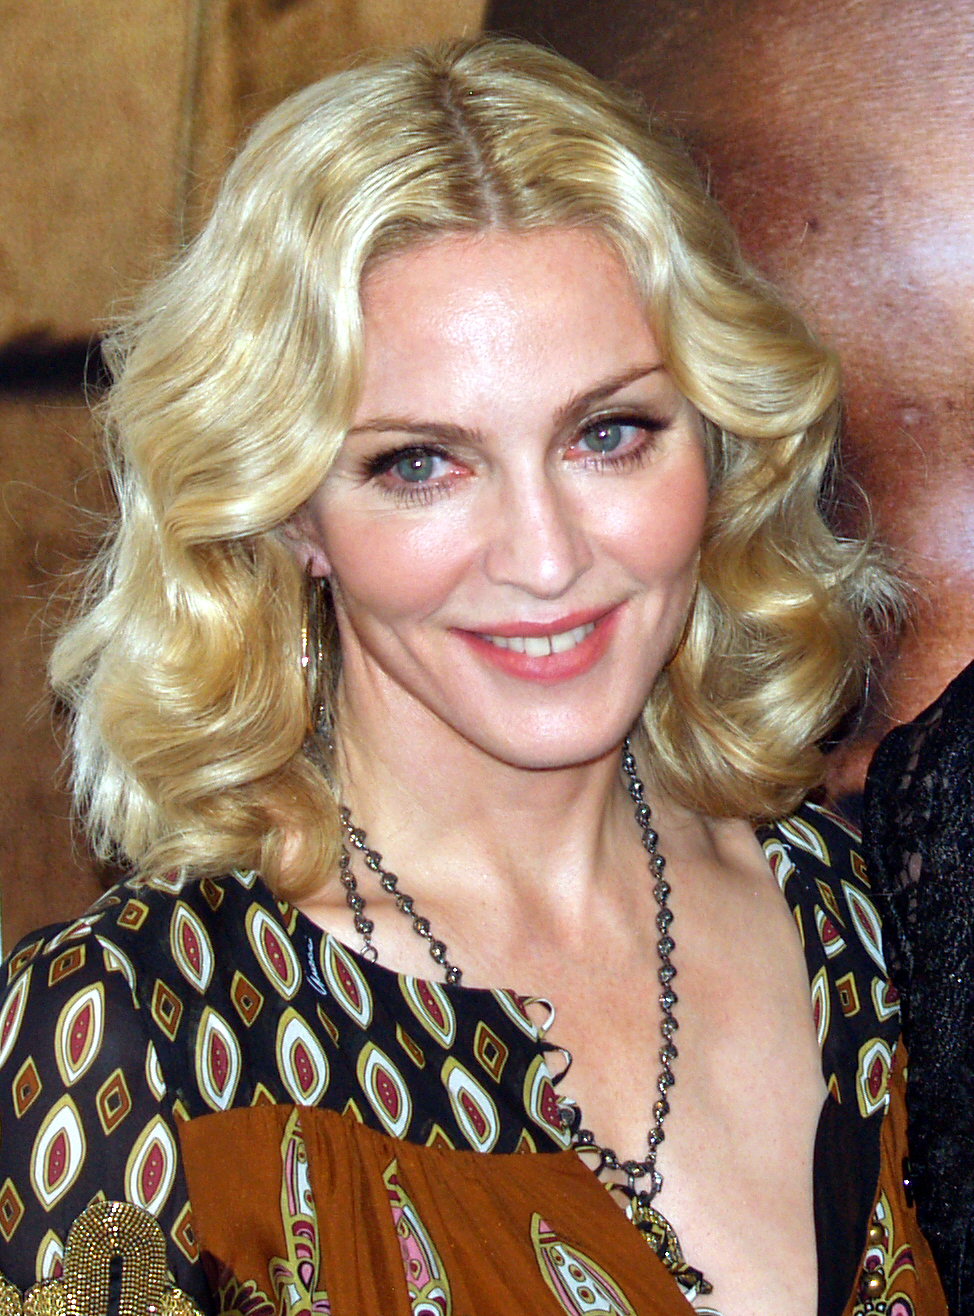 Madonna at the premier of "I am because we are"